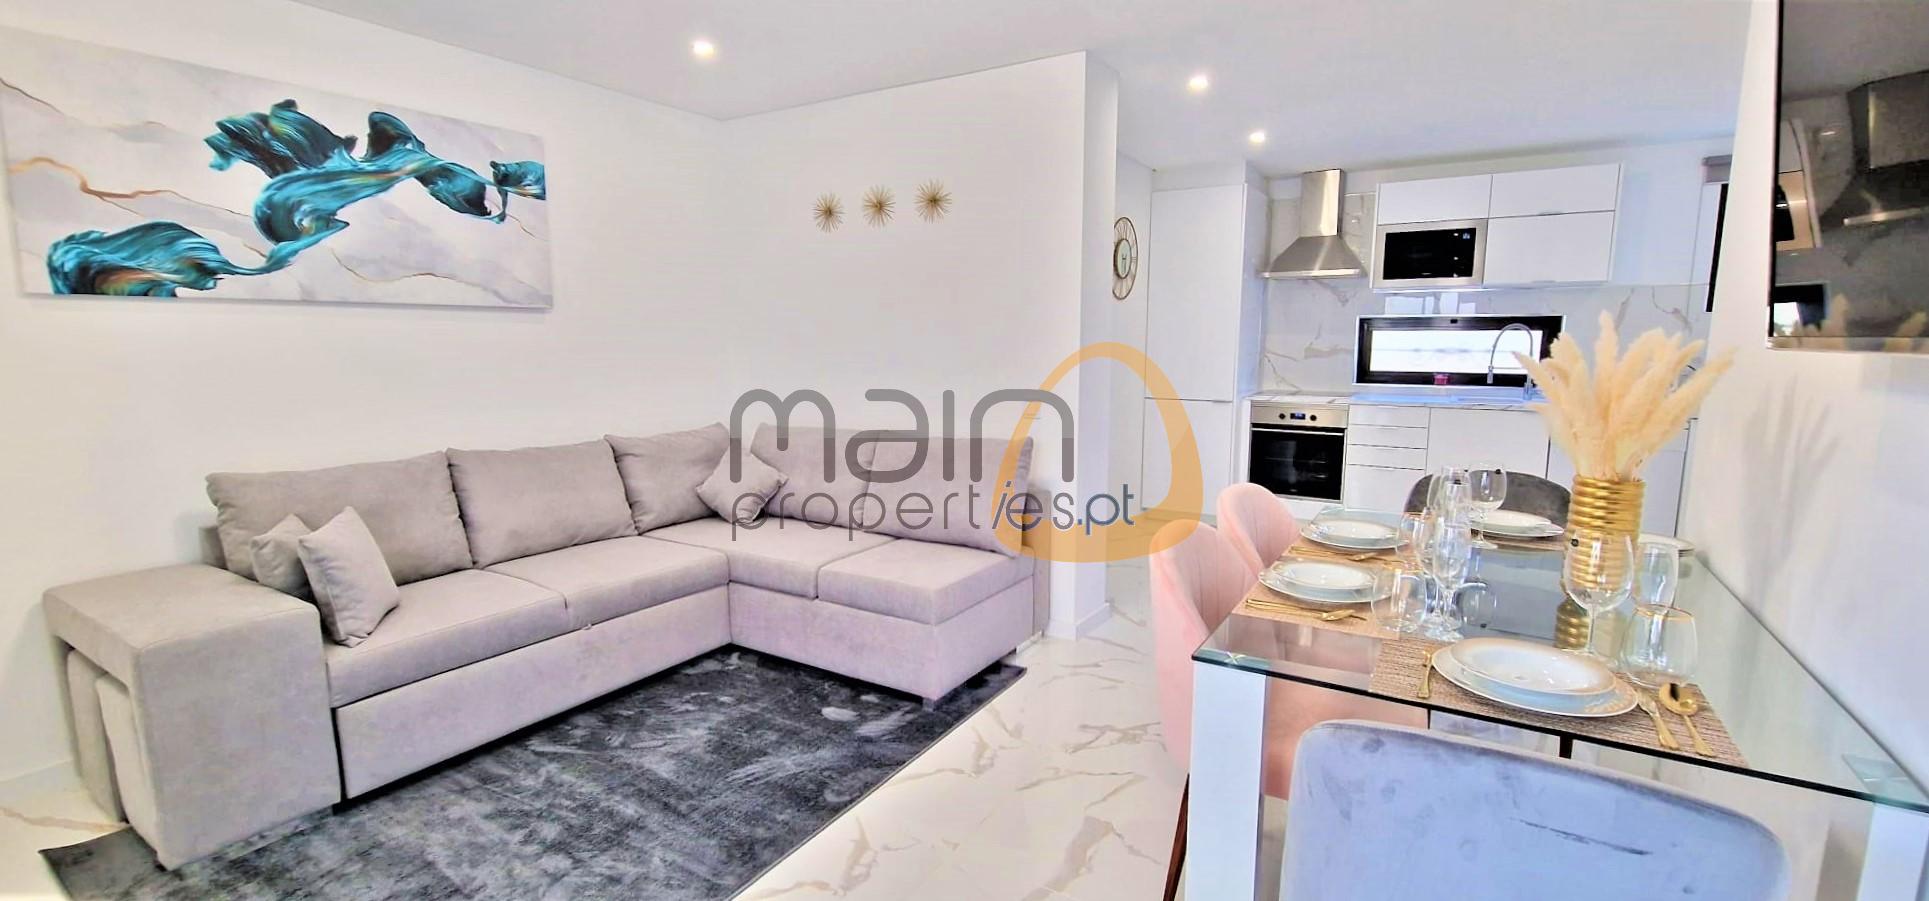 1 bedroom apartment in condominium with swimming pool only 700 meters from the beach in Albufeira